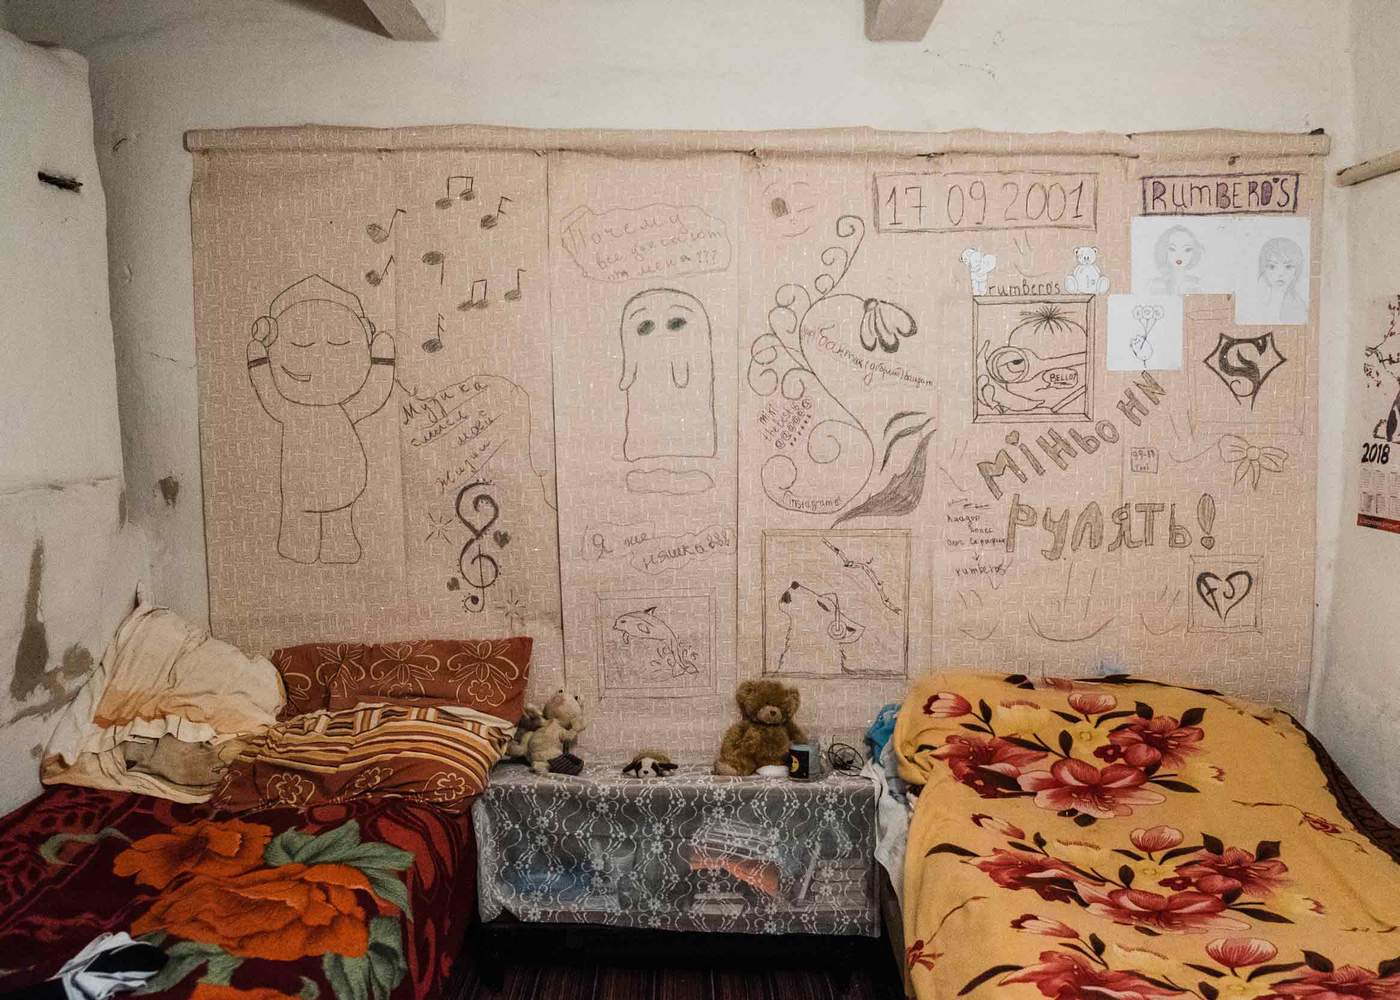 Iryna's sketches cover the walls of the sisters' bedroom